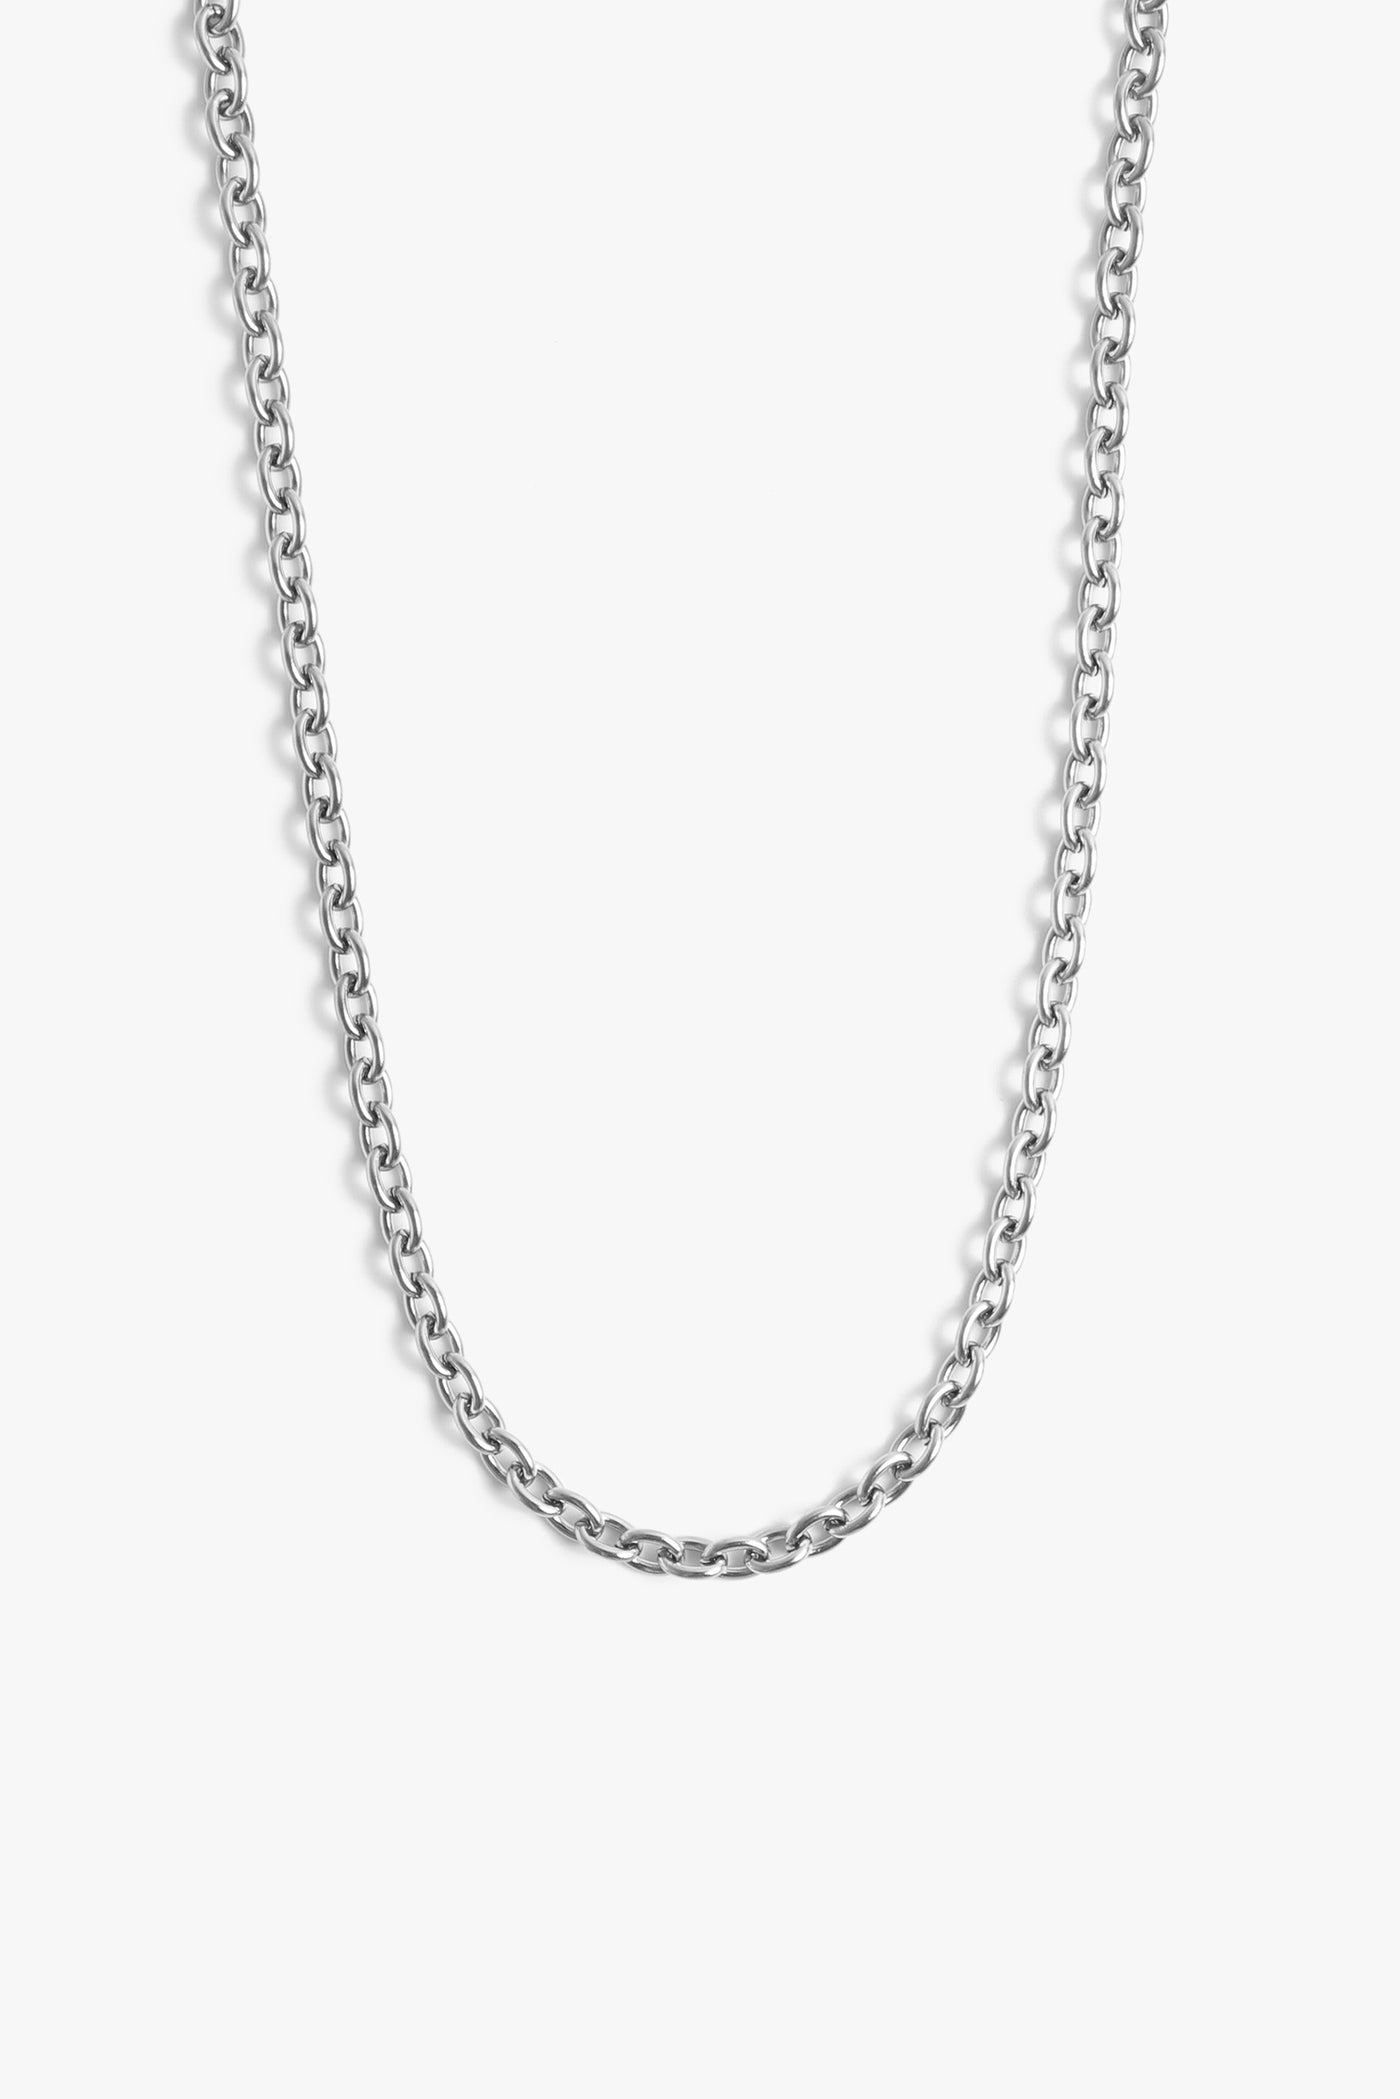 Marrin Costello Jewelry Mica Chain round link chain with lobster clasp closure and extender. Waterproof, sustainable, hypoallergenic. Polished stainless steel.